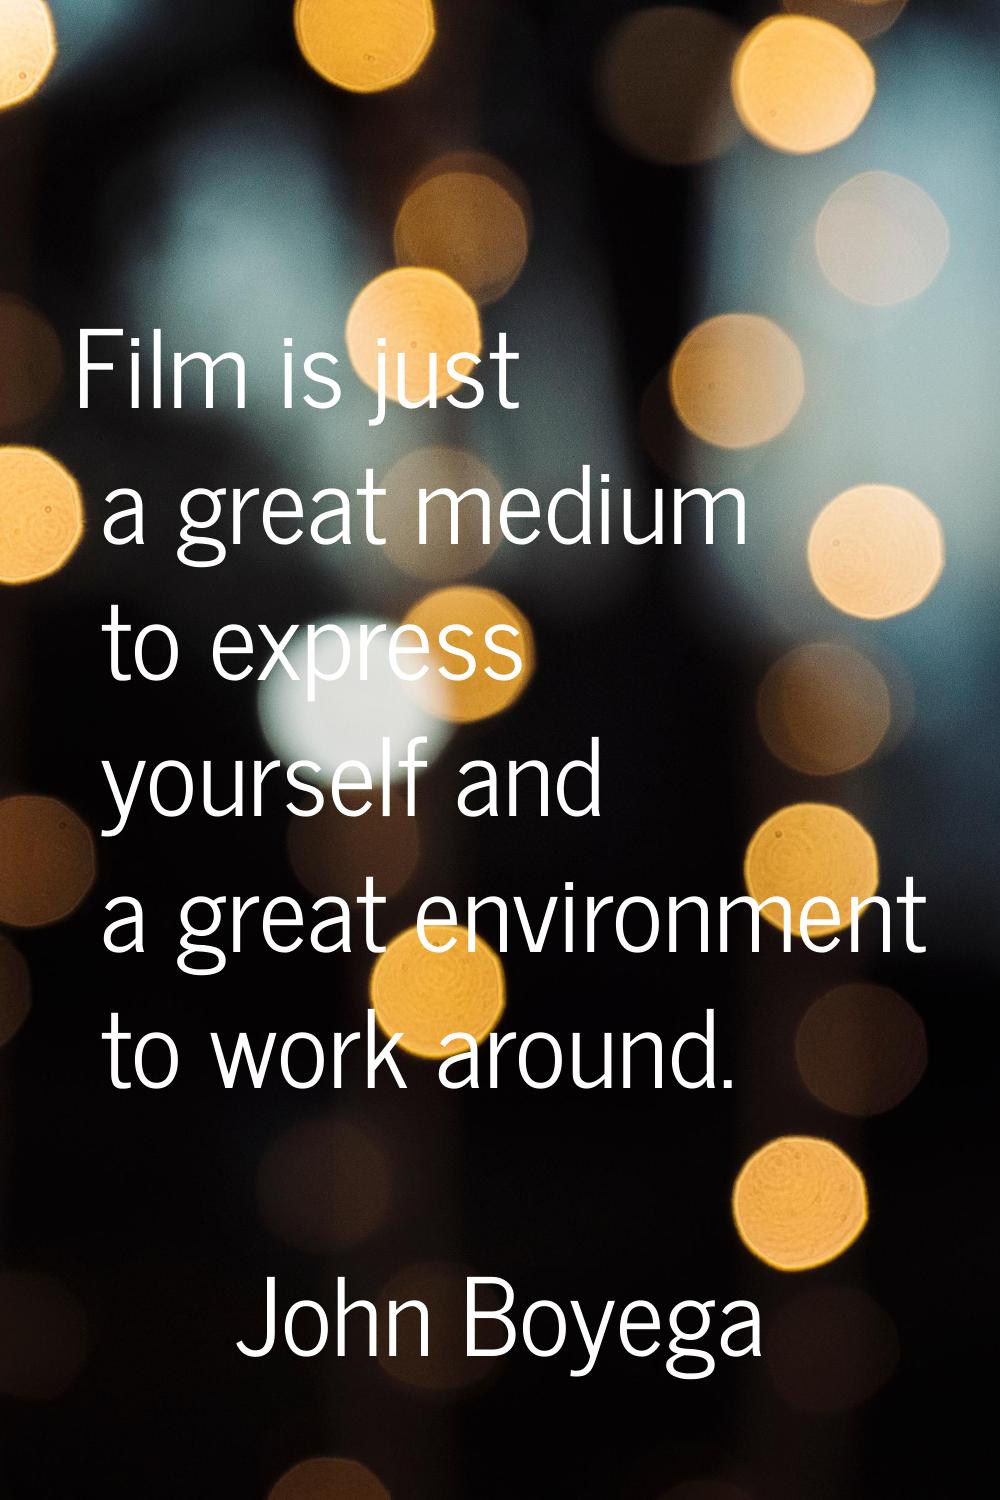 Film is just a great medium to express yourself and a great environment to work around.